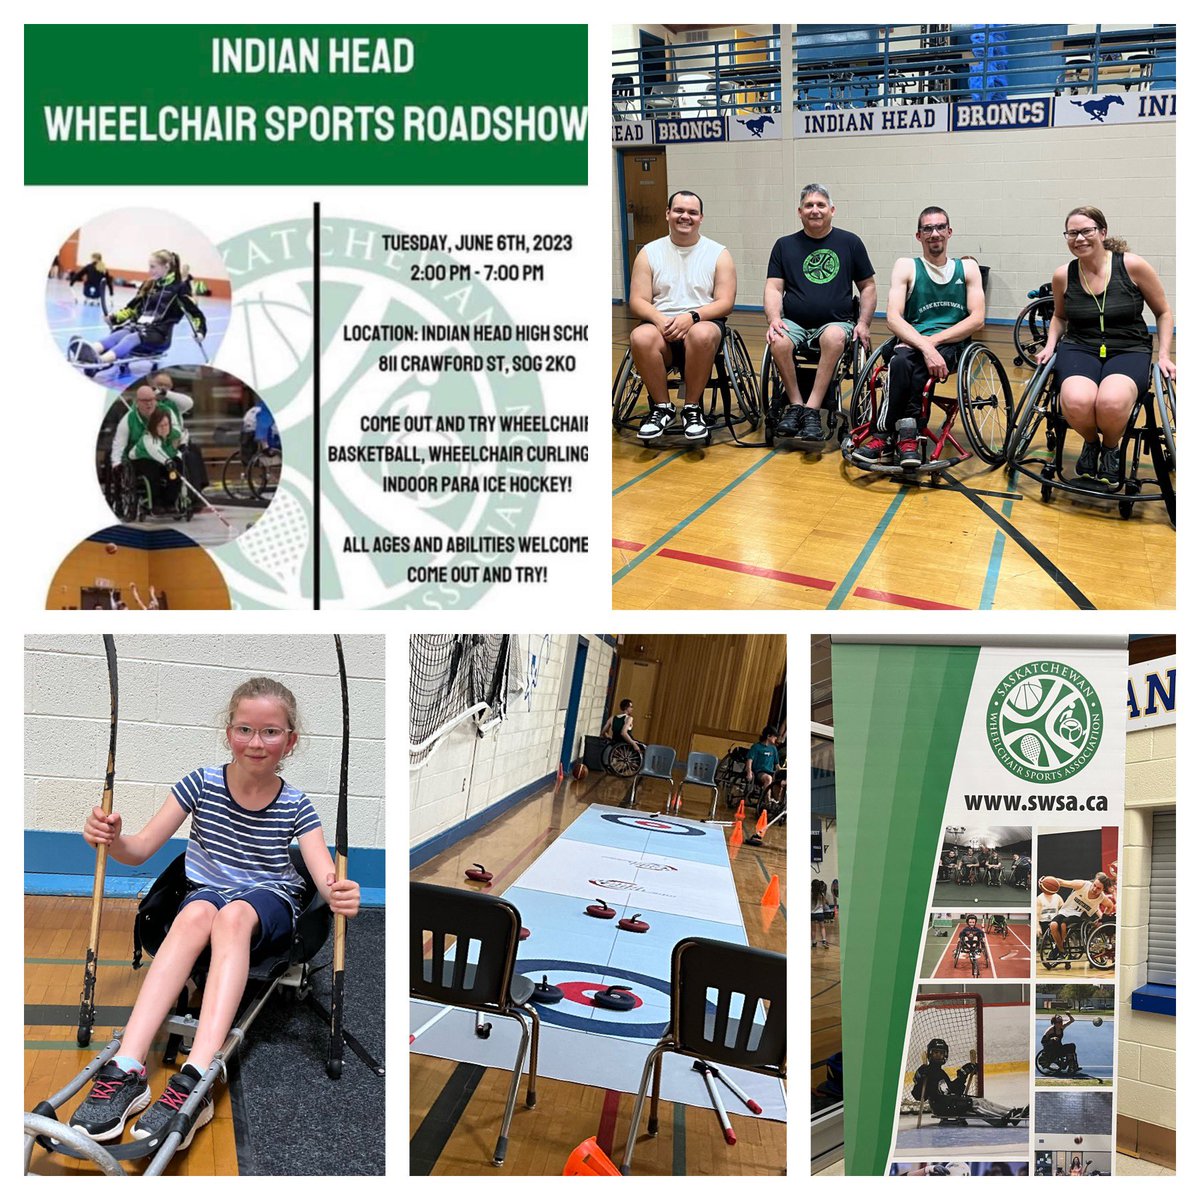 Special thanks to Janelle Norman, our SCC chair, for organizing the Wheelchair Sport Clinic today at IHHS. Our students really enjoyed this engaging learning opportunity! @IHES_Colts @PrairieValleySD